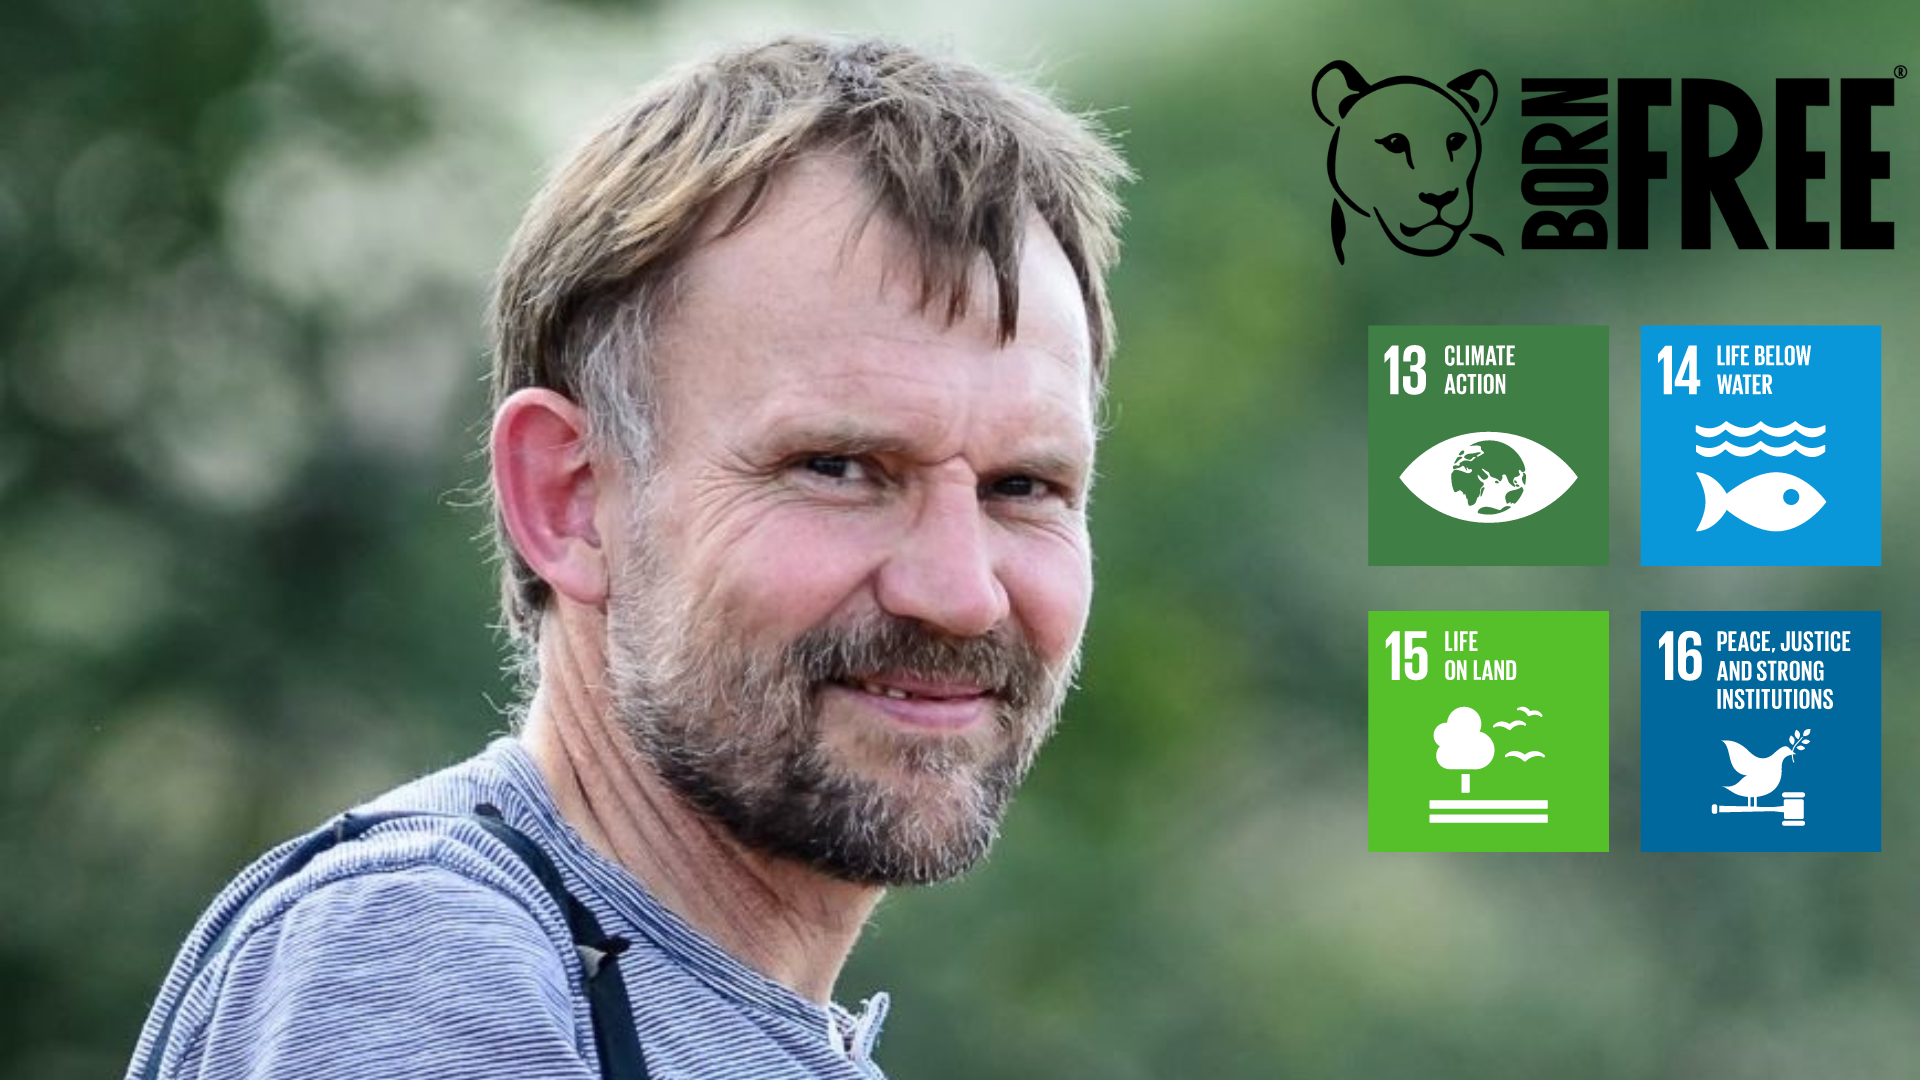 Mark Jones from the Born Free NGO is featured with the logos for SDG 13, SDG 14, SDG 15 and SDG 16